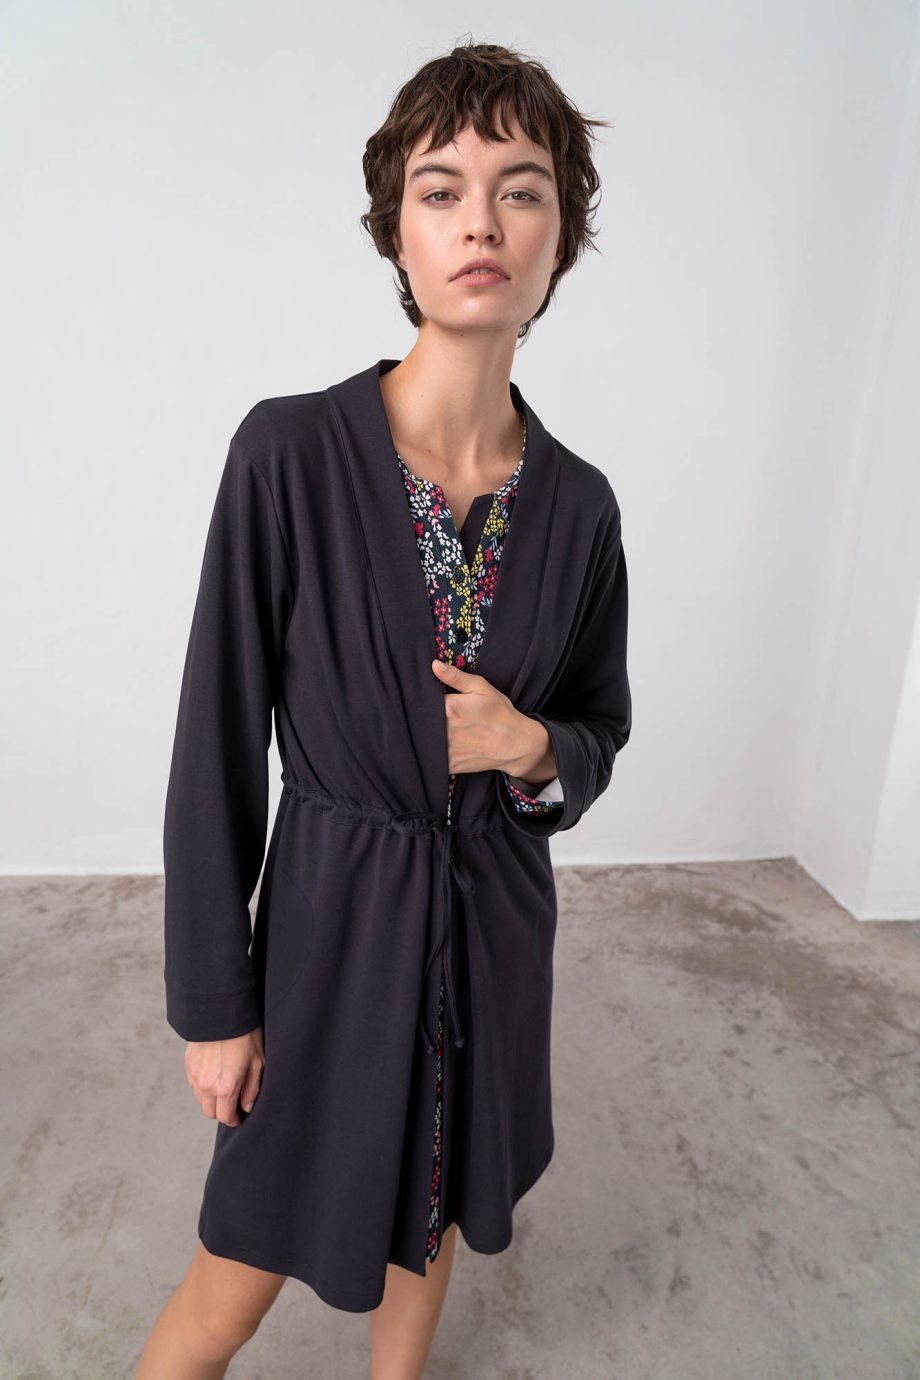 Robe with Long Sleeves